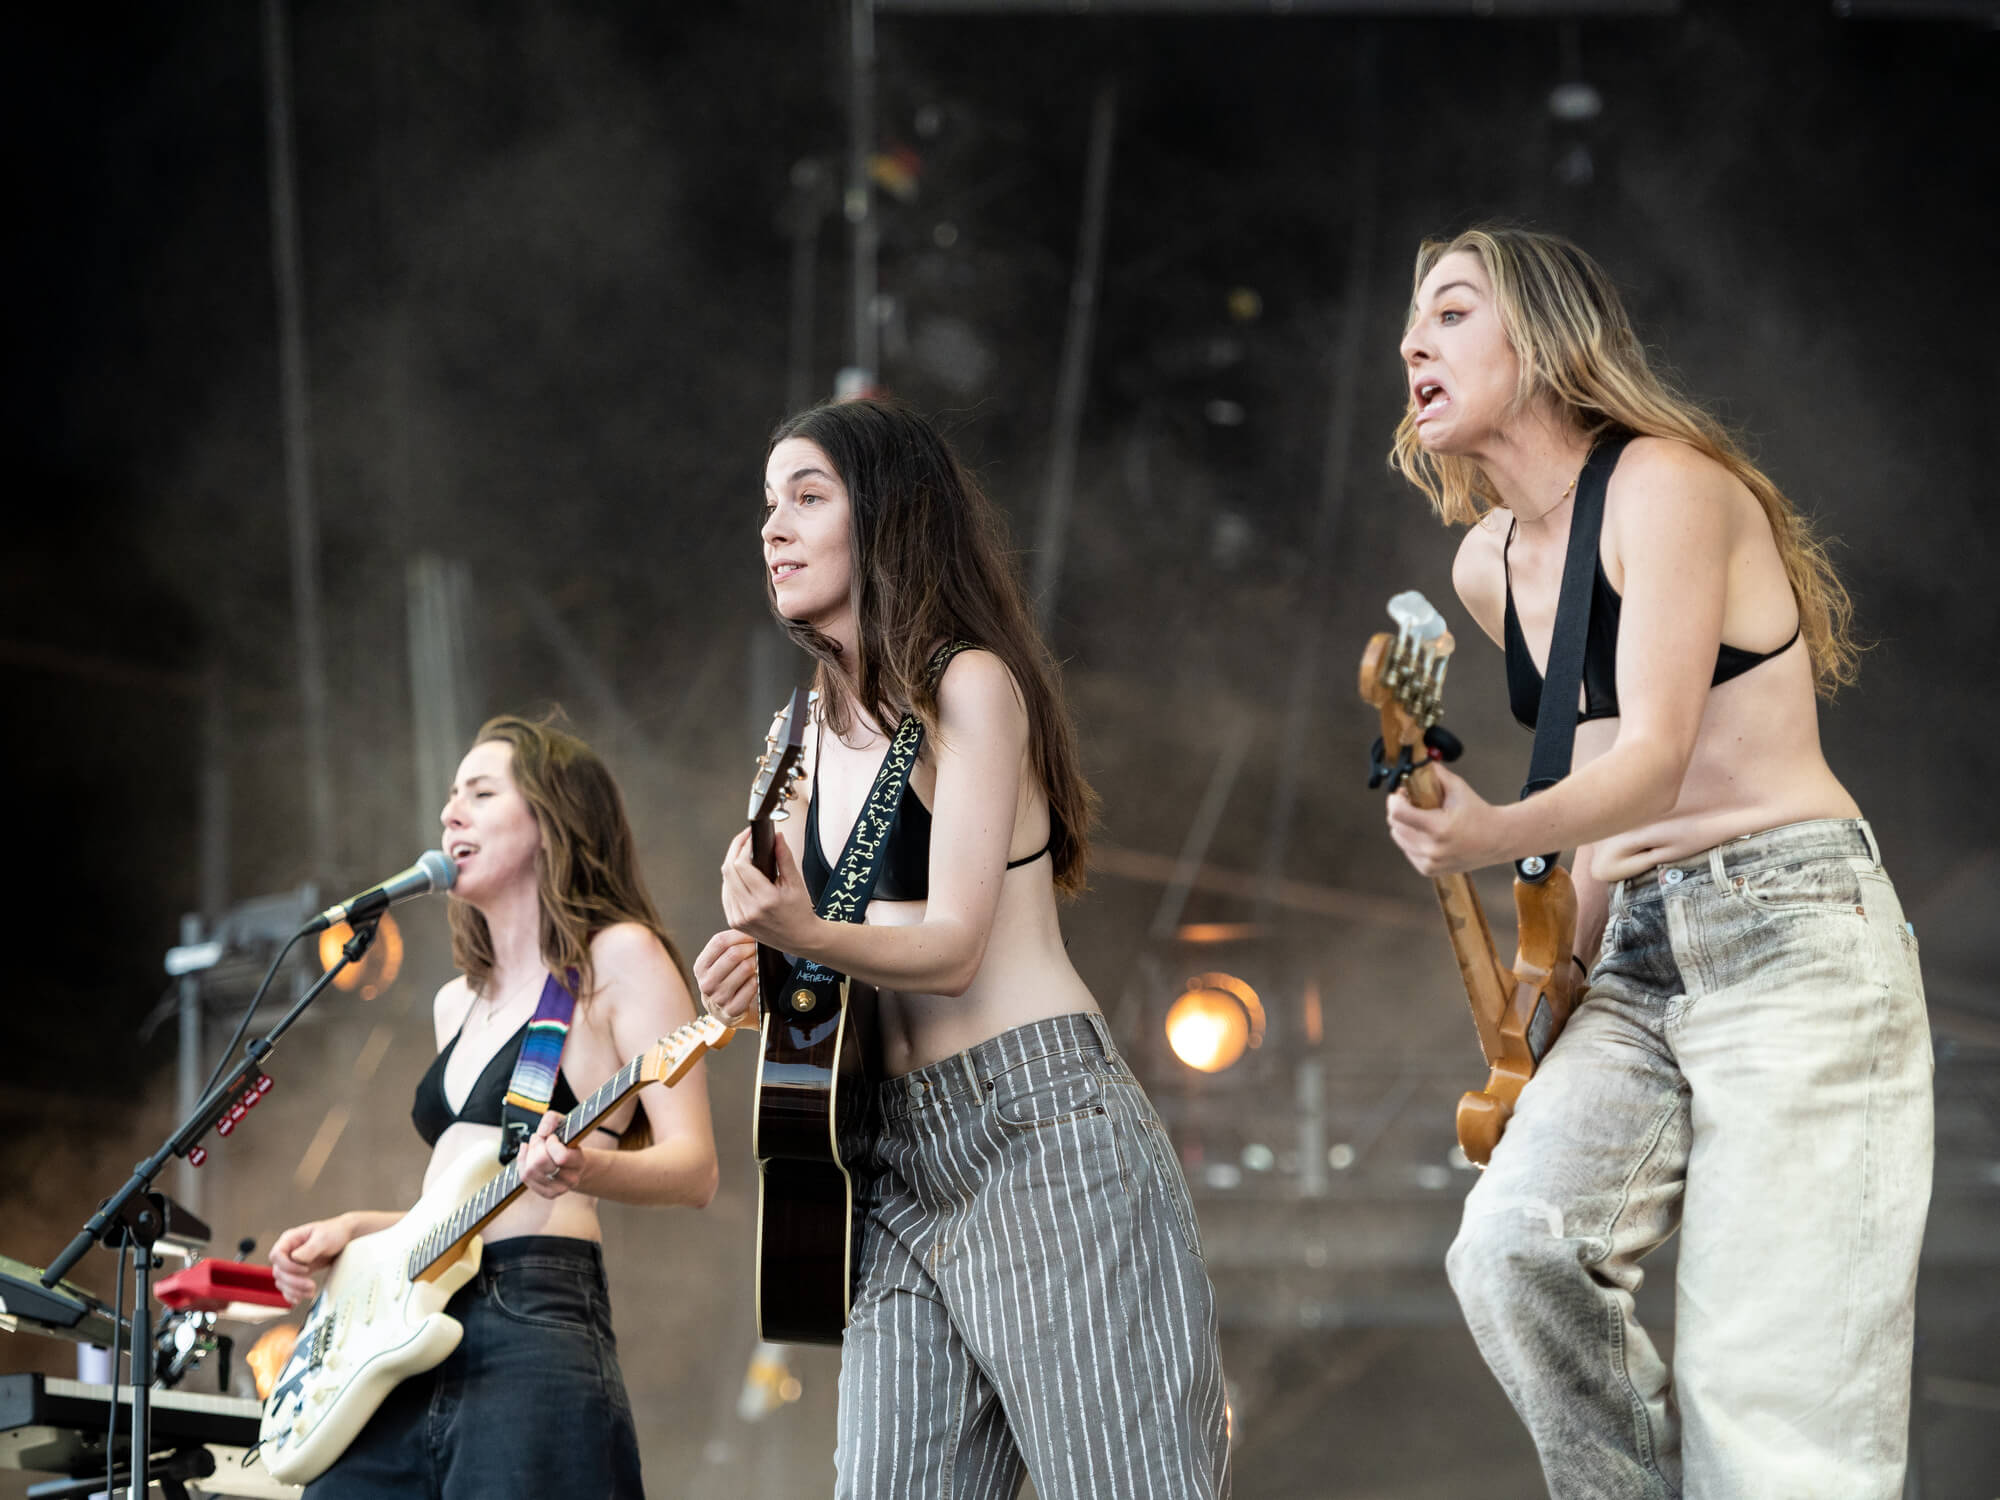 Haim playing instruments on stage